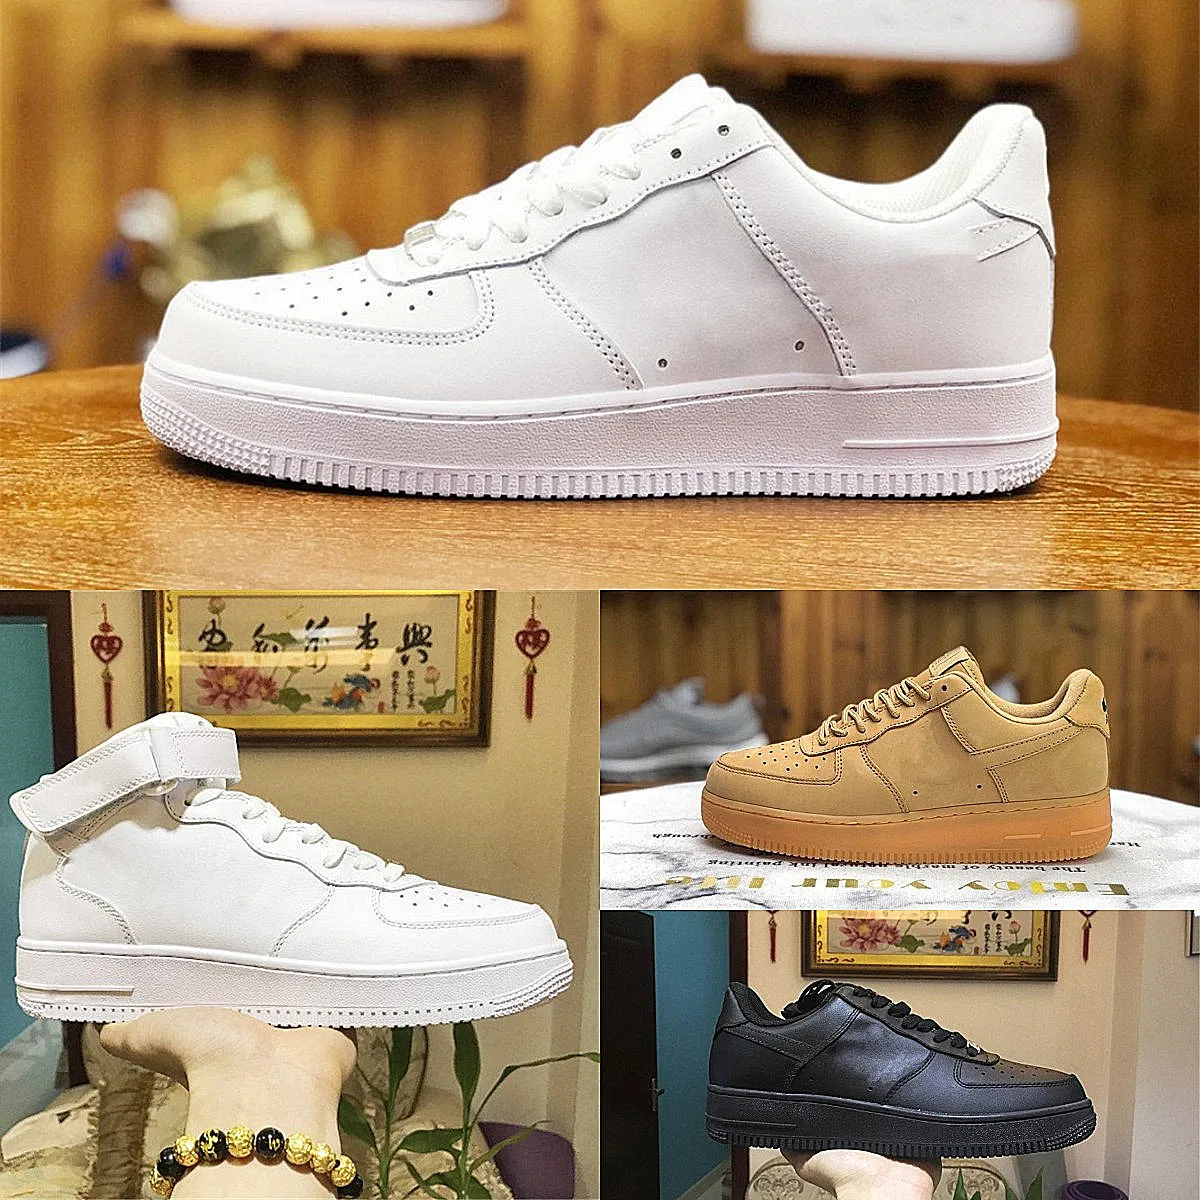 Designers New FoRcEs Outdoor Skateboard Shoes Discount Men Low One Unisex Classic 1 07 Knit Euro Airs High Women All White Black Wheat Running Sports Fashion Sneakers